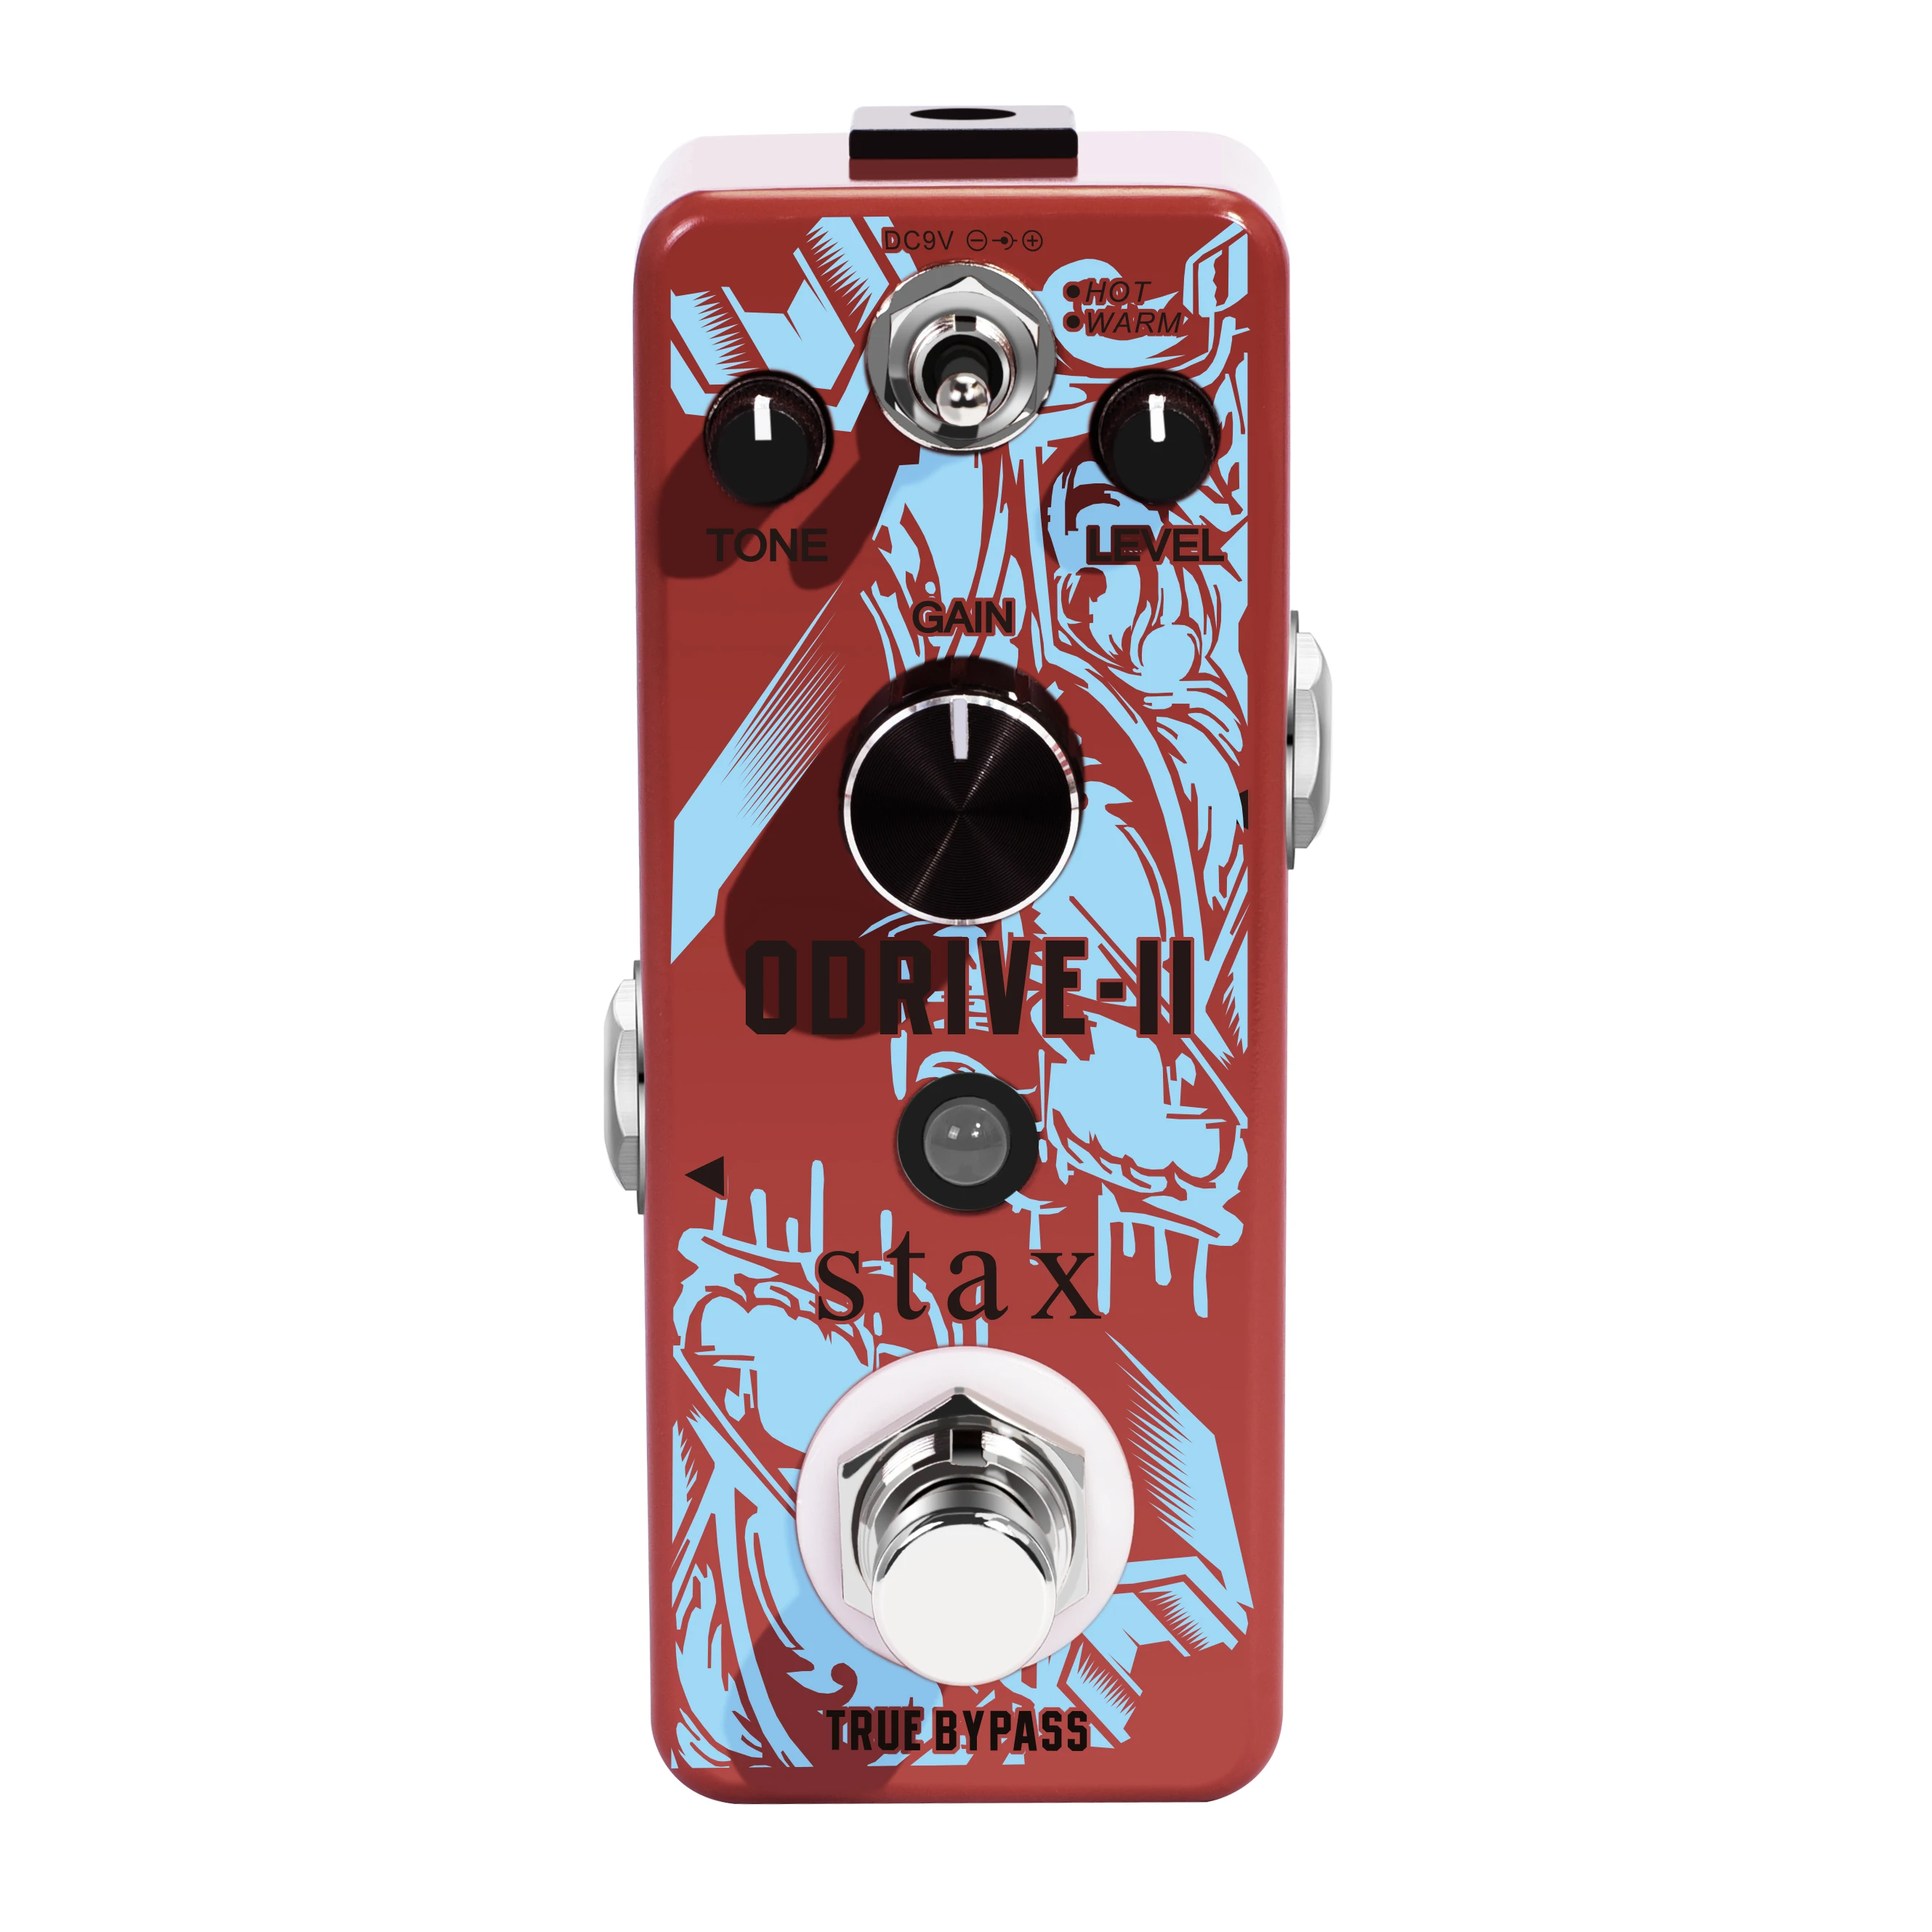 Stax LEF-302B ODRIVE-II Classical Electronic Overdrive Guitar Effect Pedal True Bypass2 Working Mode Full Metal Case фото